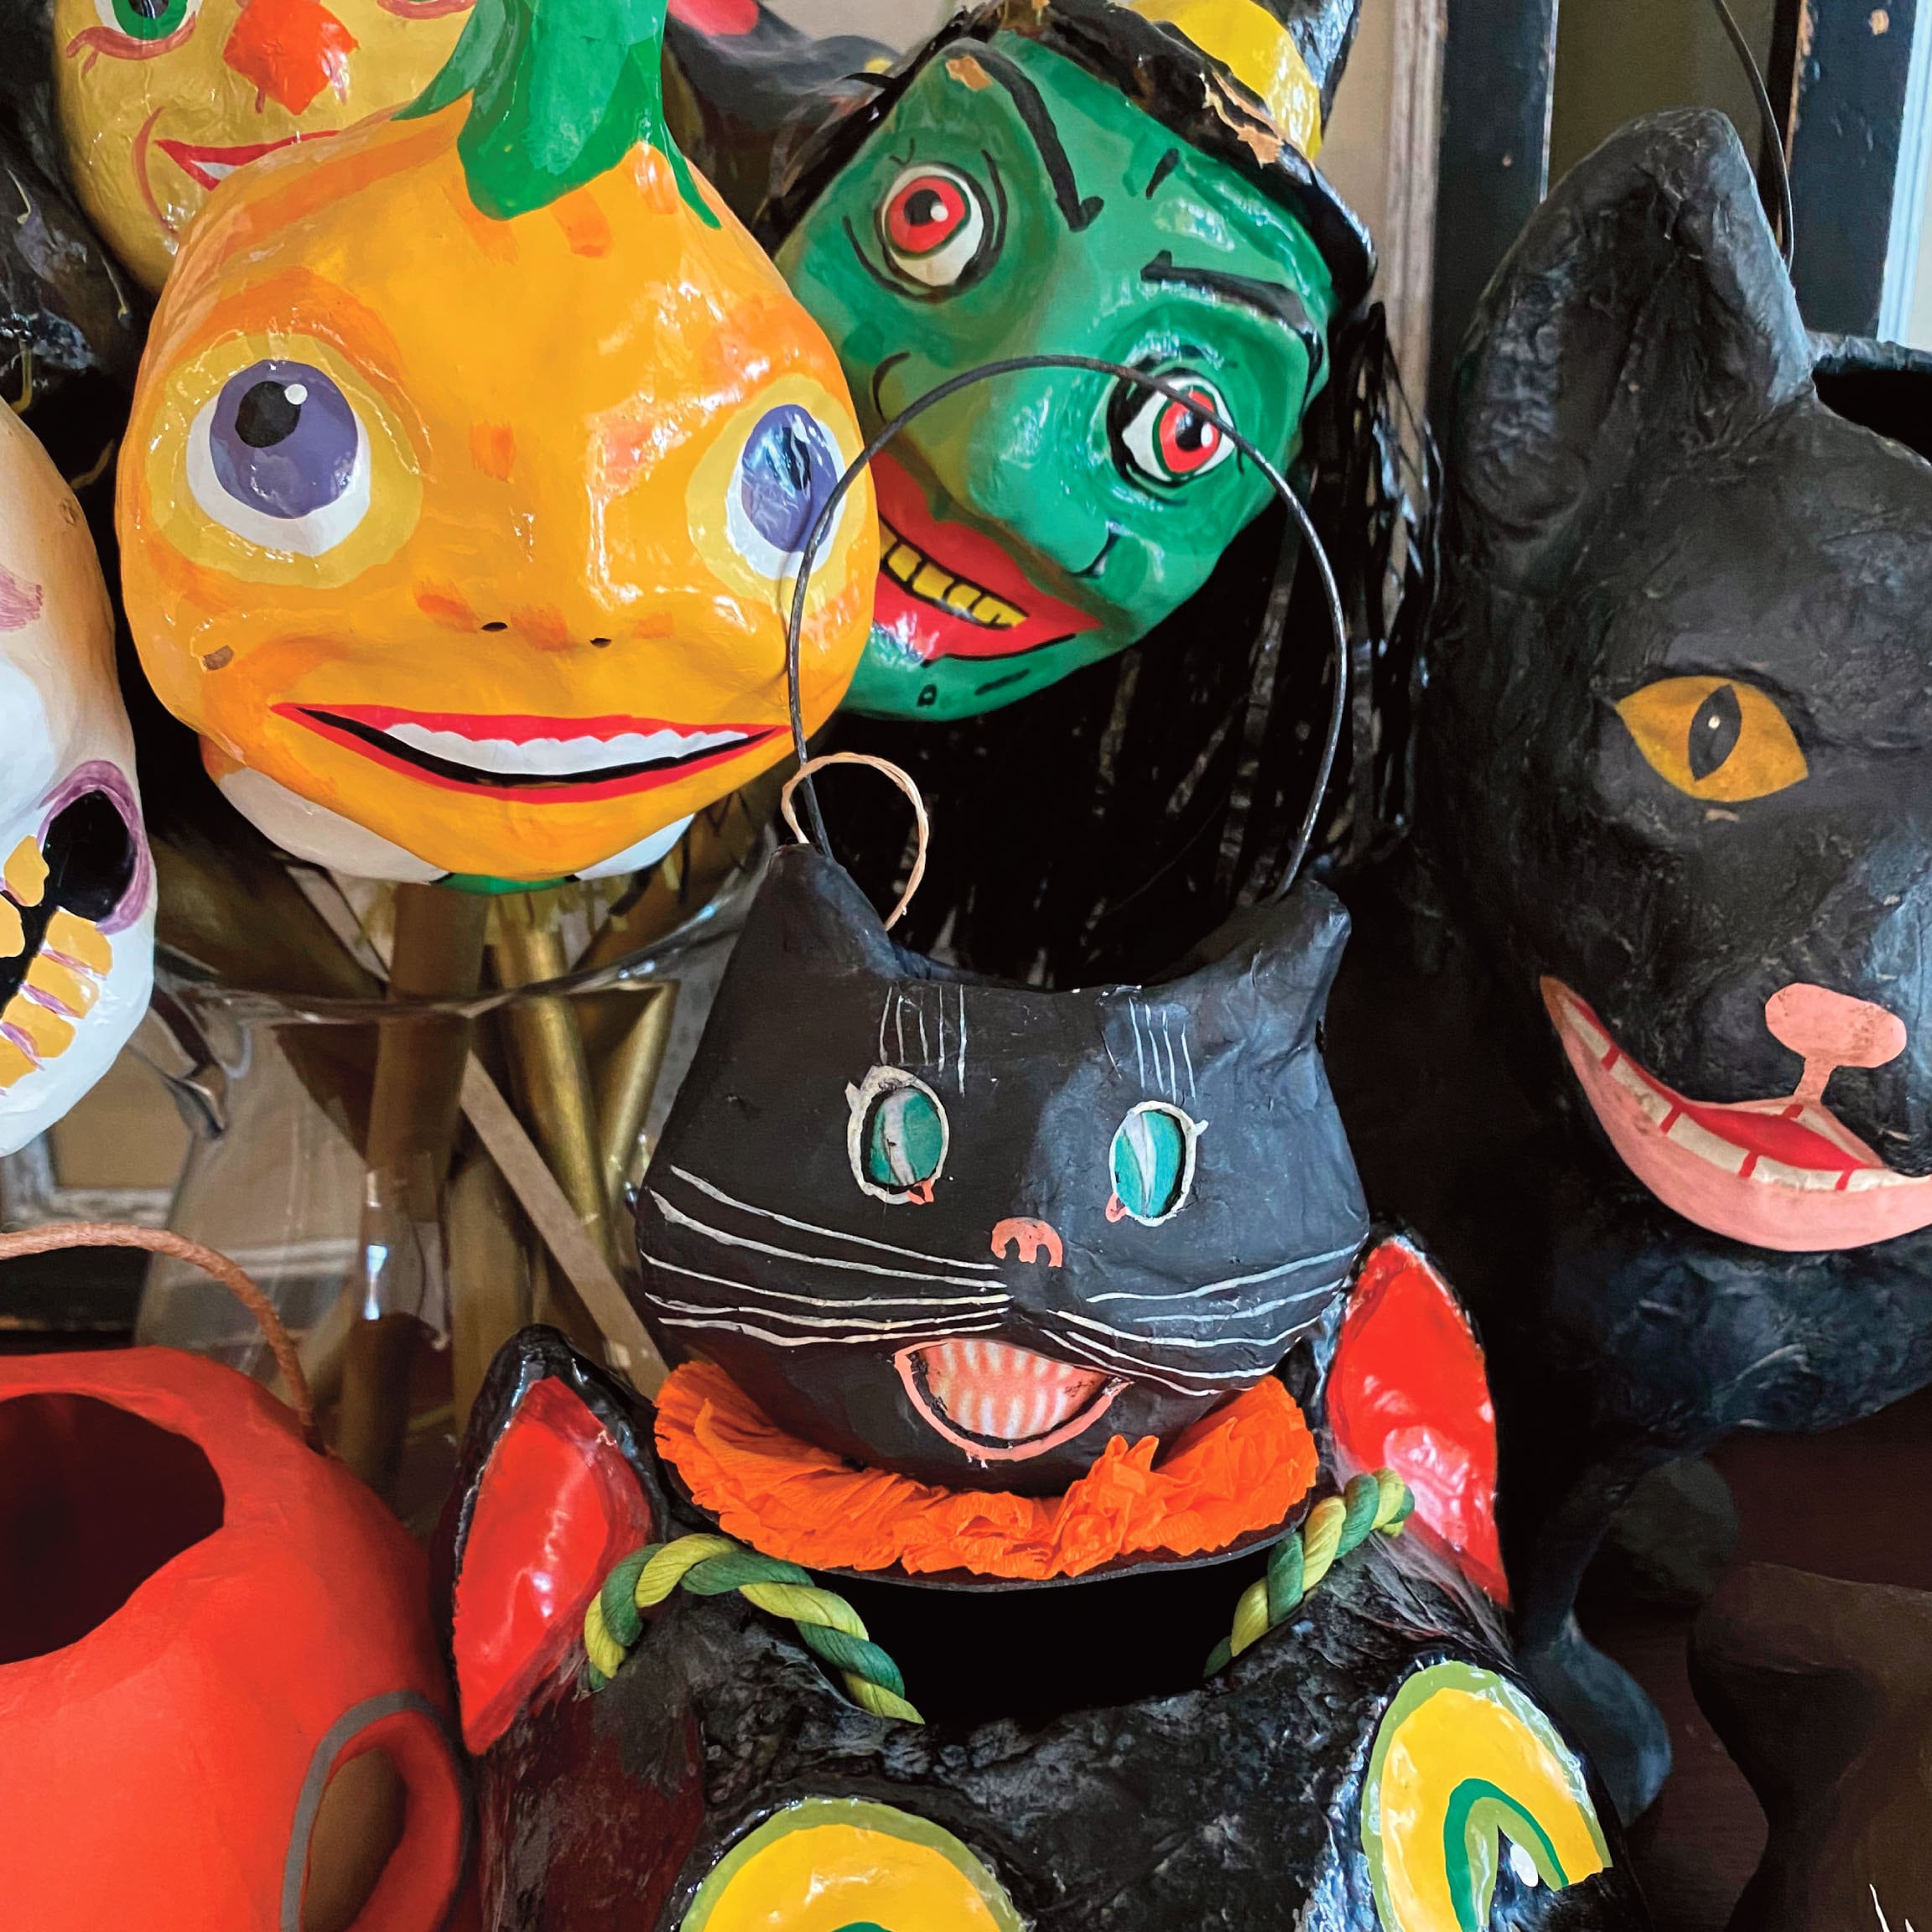 24 Pack: Cat Paper Mache Mask by Creatology™